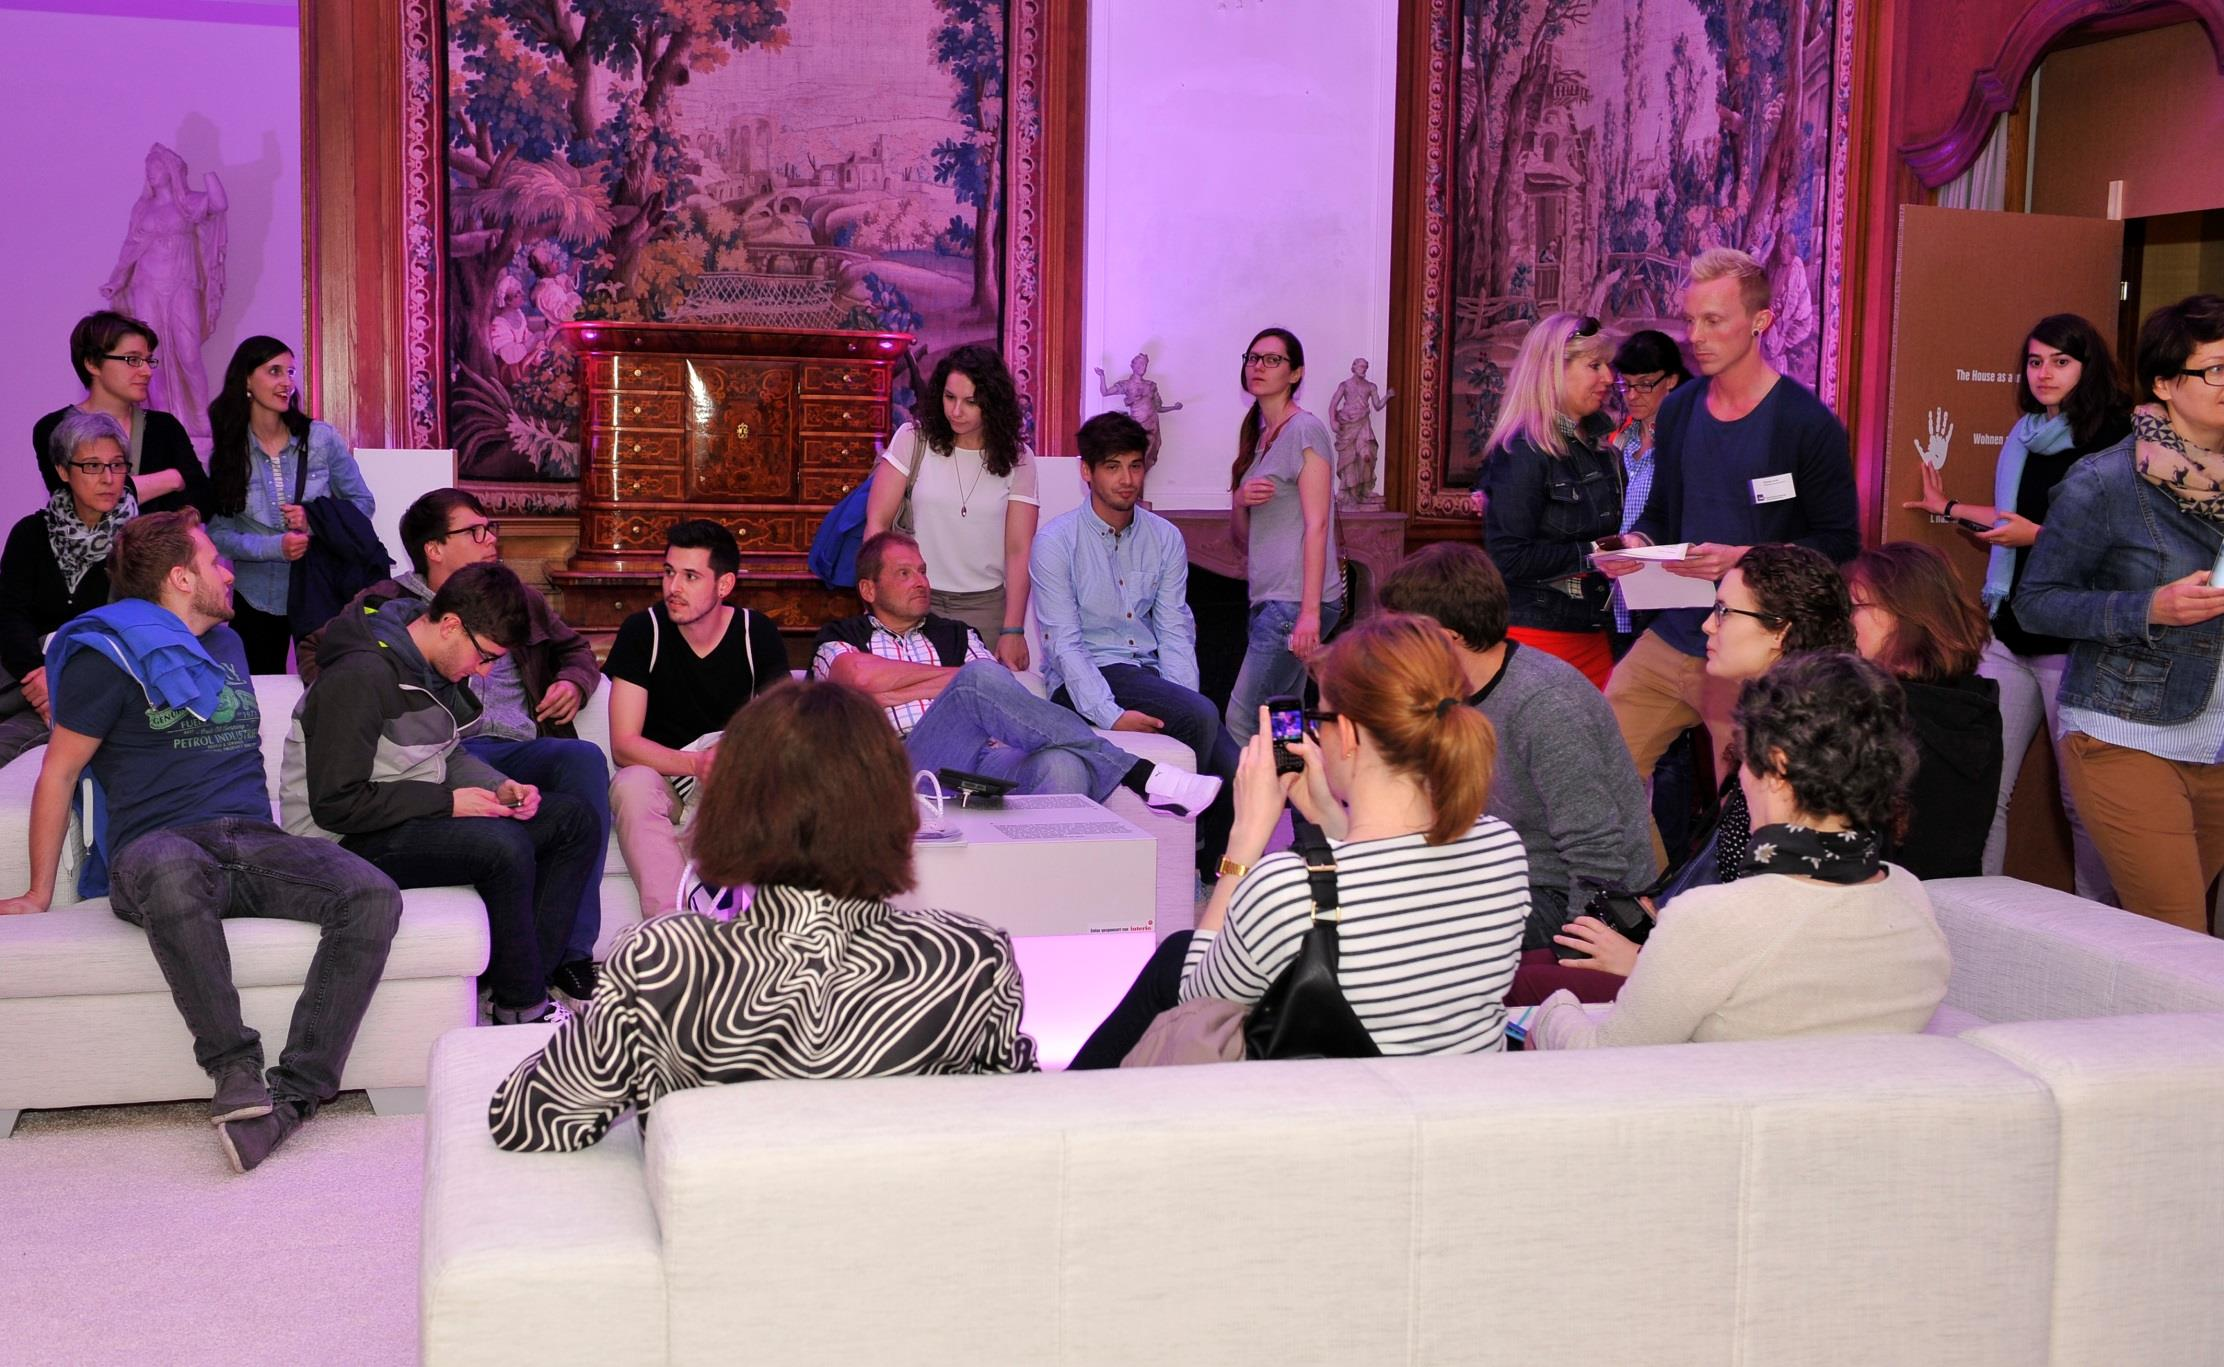 ECULTURE: MAKING THE MUSEUM A SOCIAL HUB SEITE 21